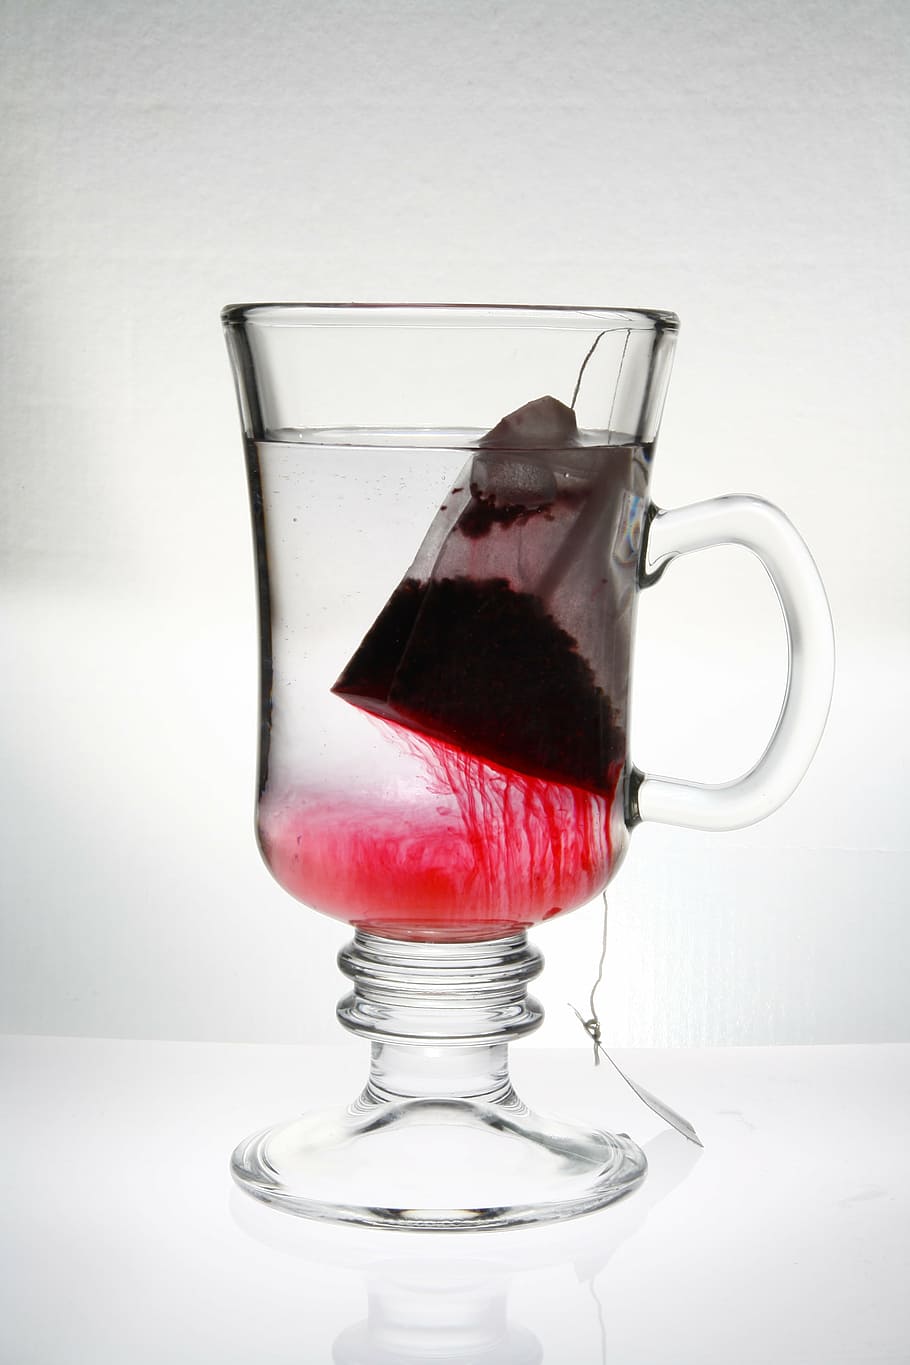 tea glass, red, fruit tea, bag, tea bags, white, food and drink, drink, refreshment, glass